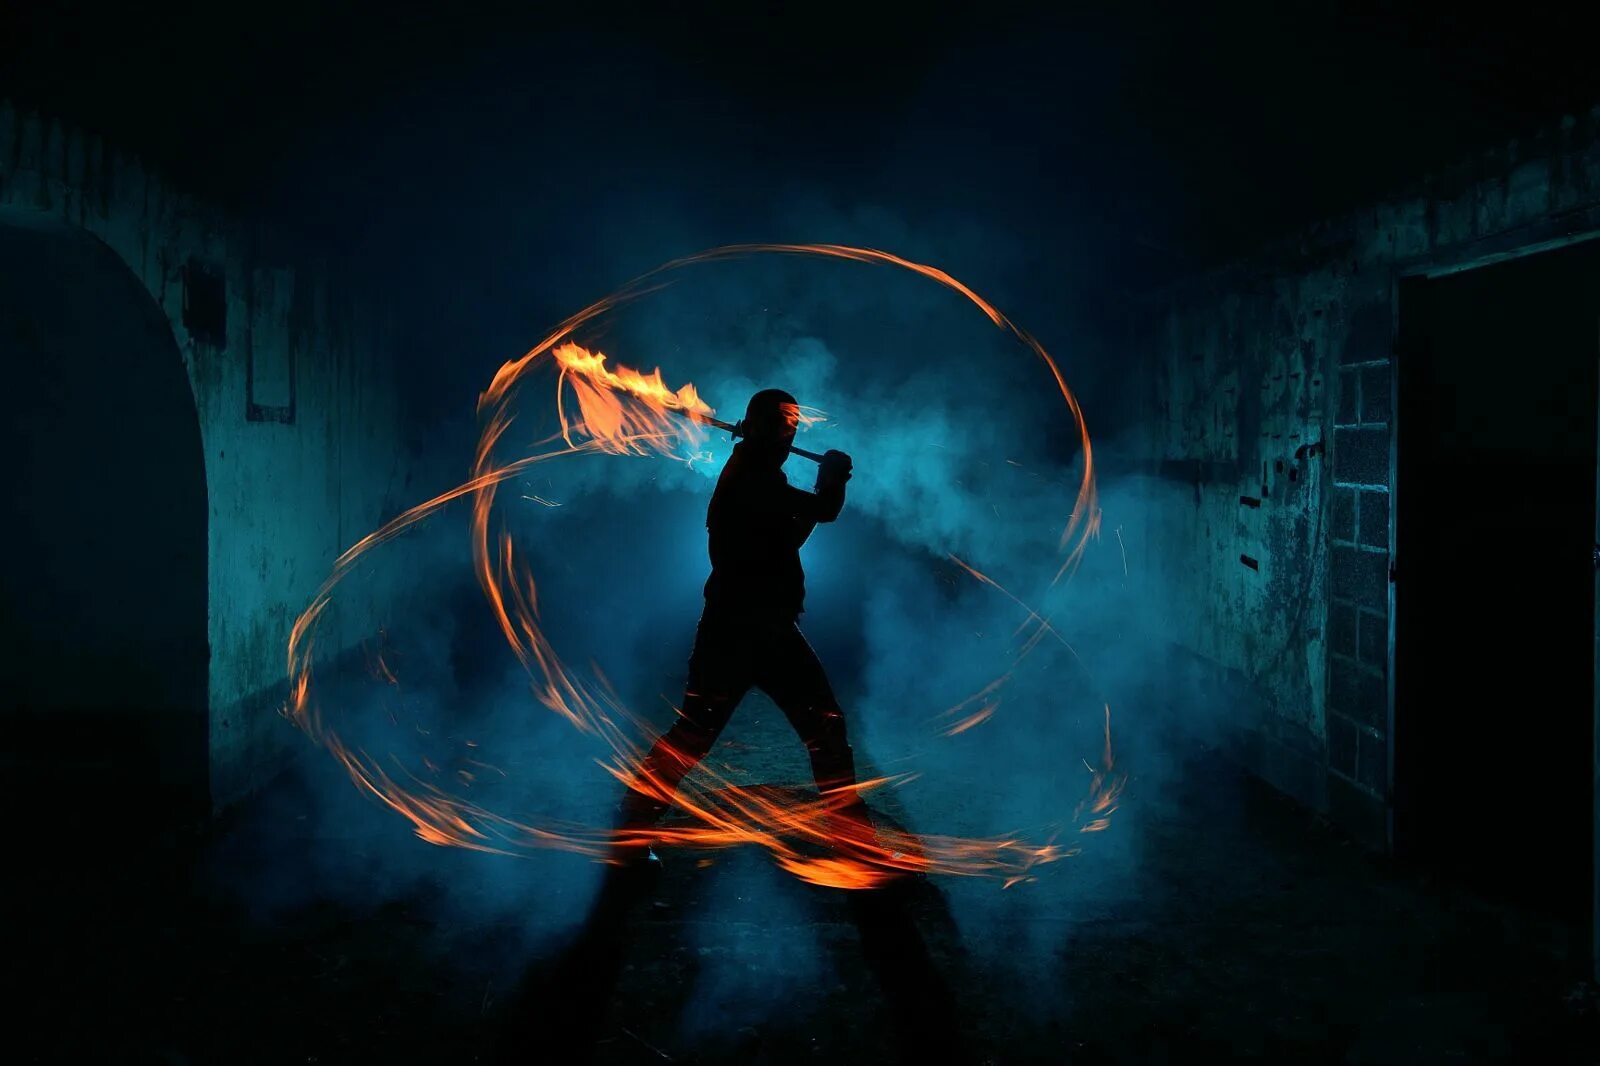 Painting lighting. Light Painting. Light Painting Photography. Bullet time. Man in Epic Light.